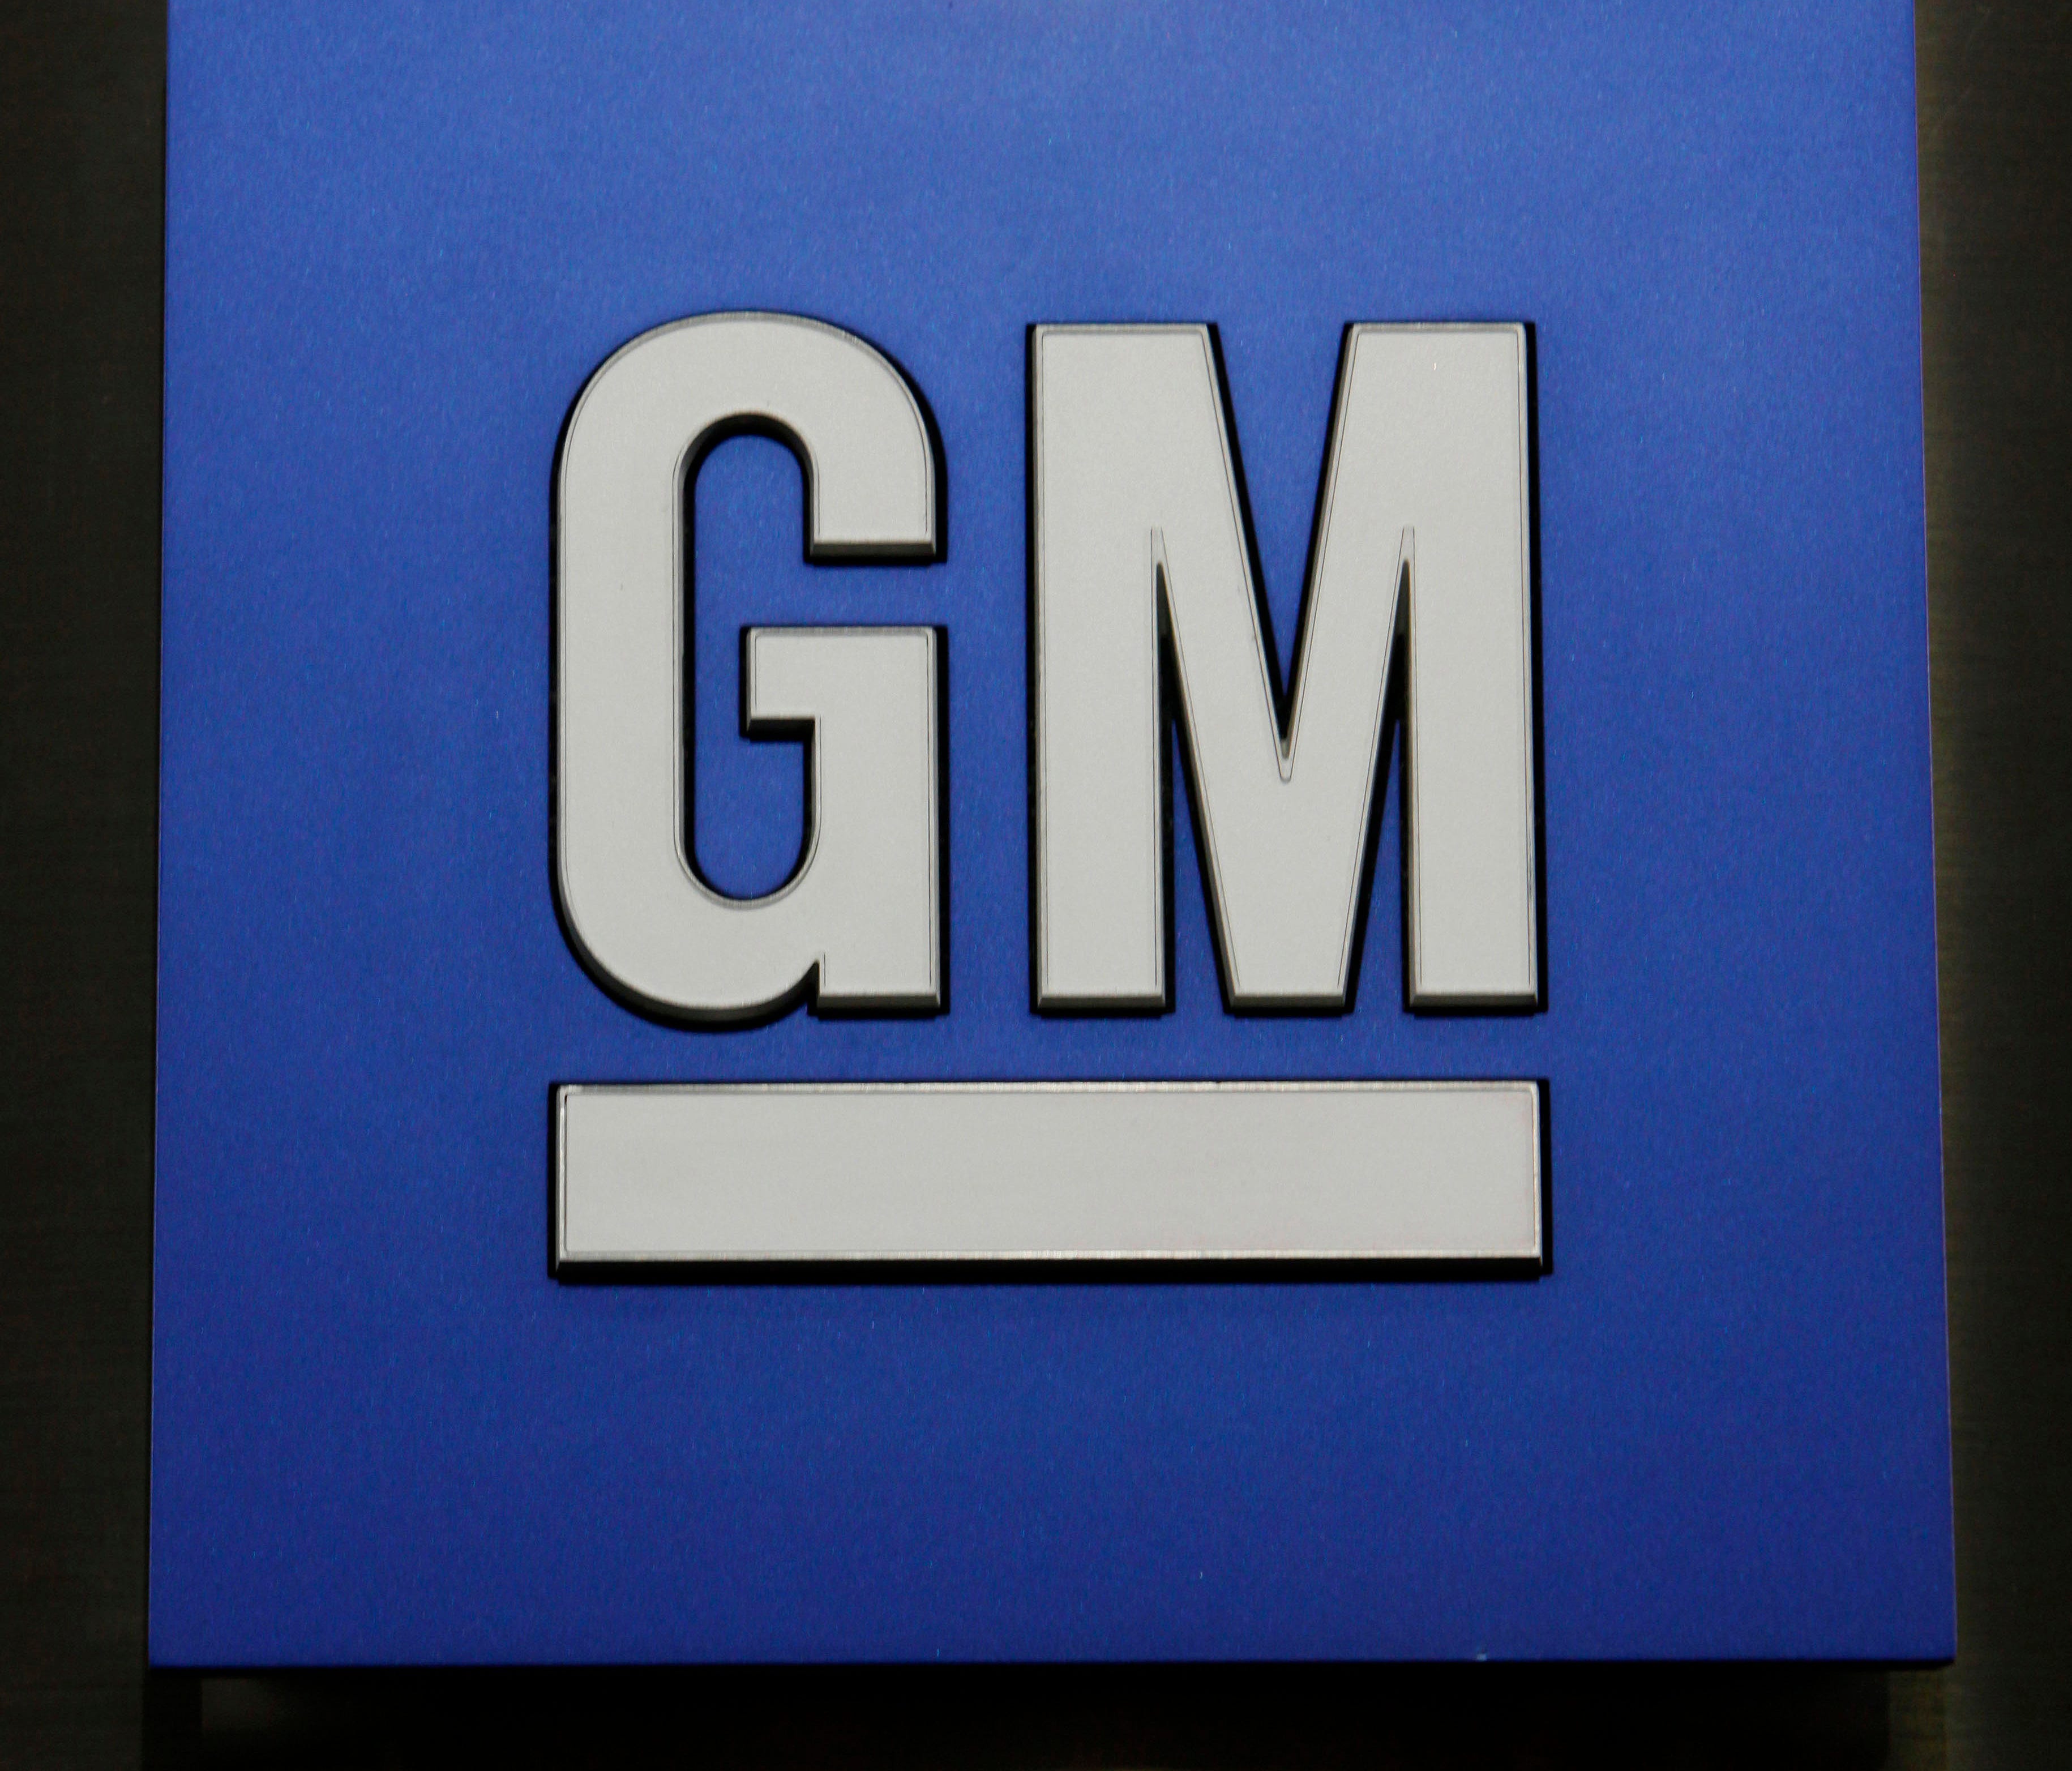 General Motors stock falls on Monday after Goldman Sachs rates the stock a sell. File photo shows GM logo.